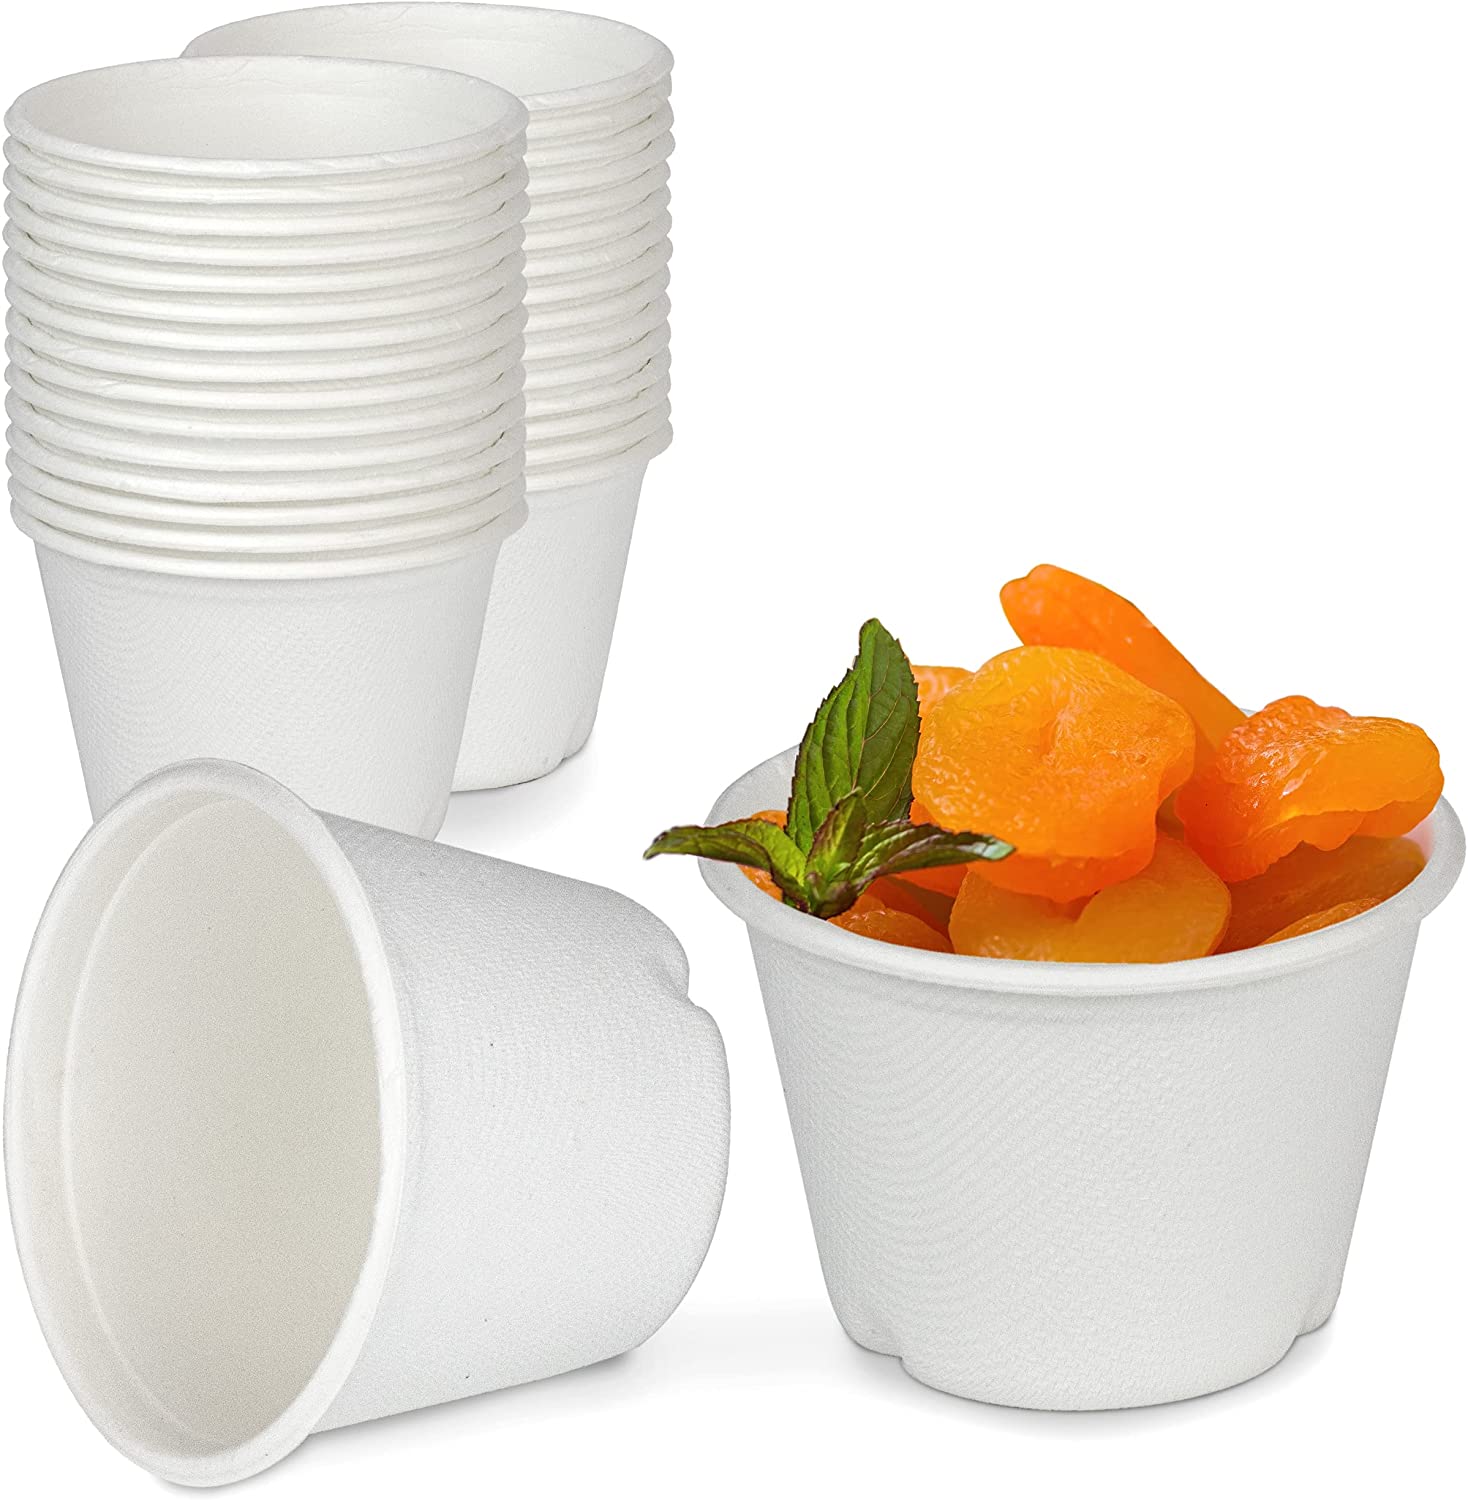 Drinking Disposable Dessert Manufacturers Automatic Paper Cup Dispenser